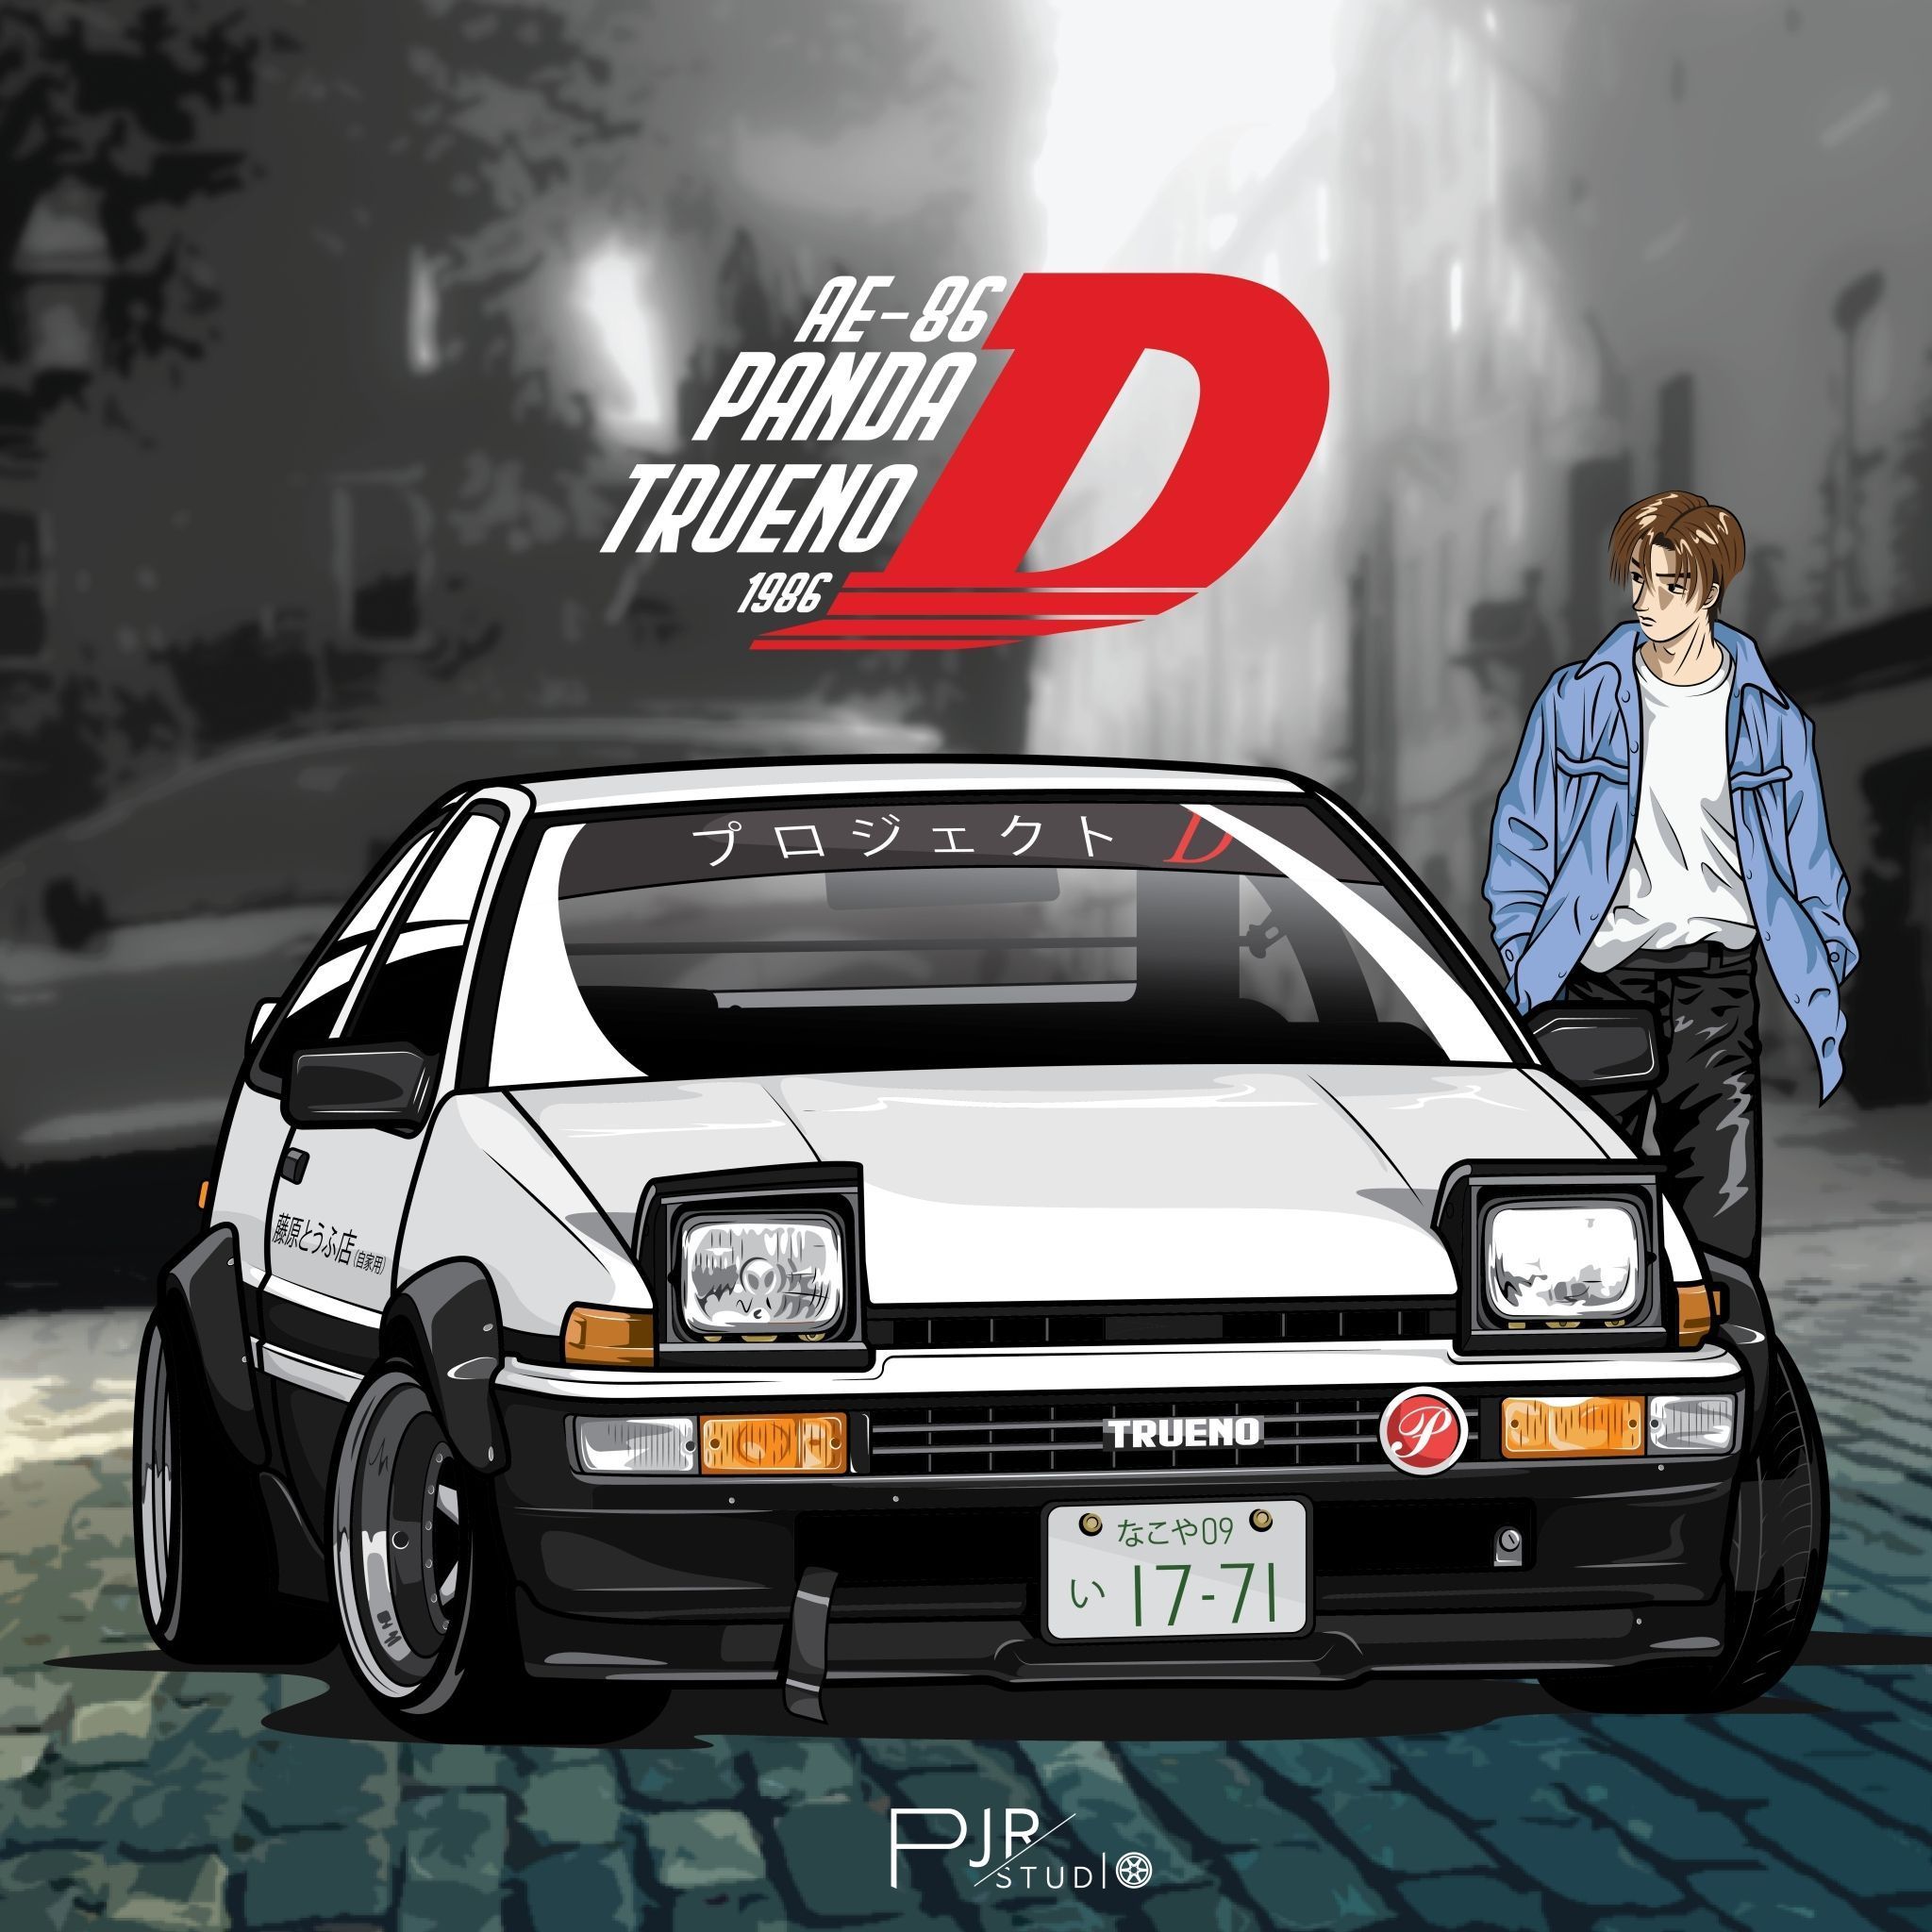 Initial D artwork of a AE86 with a panda body kit and a 1986 license plate - Toyota AE86